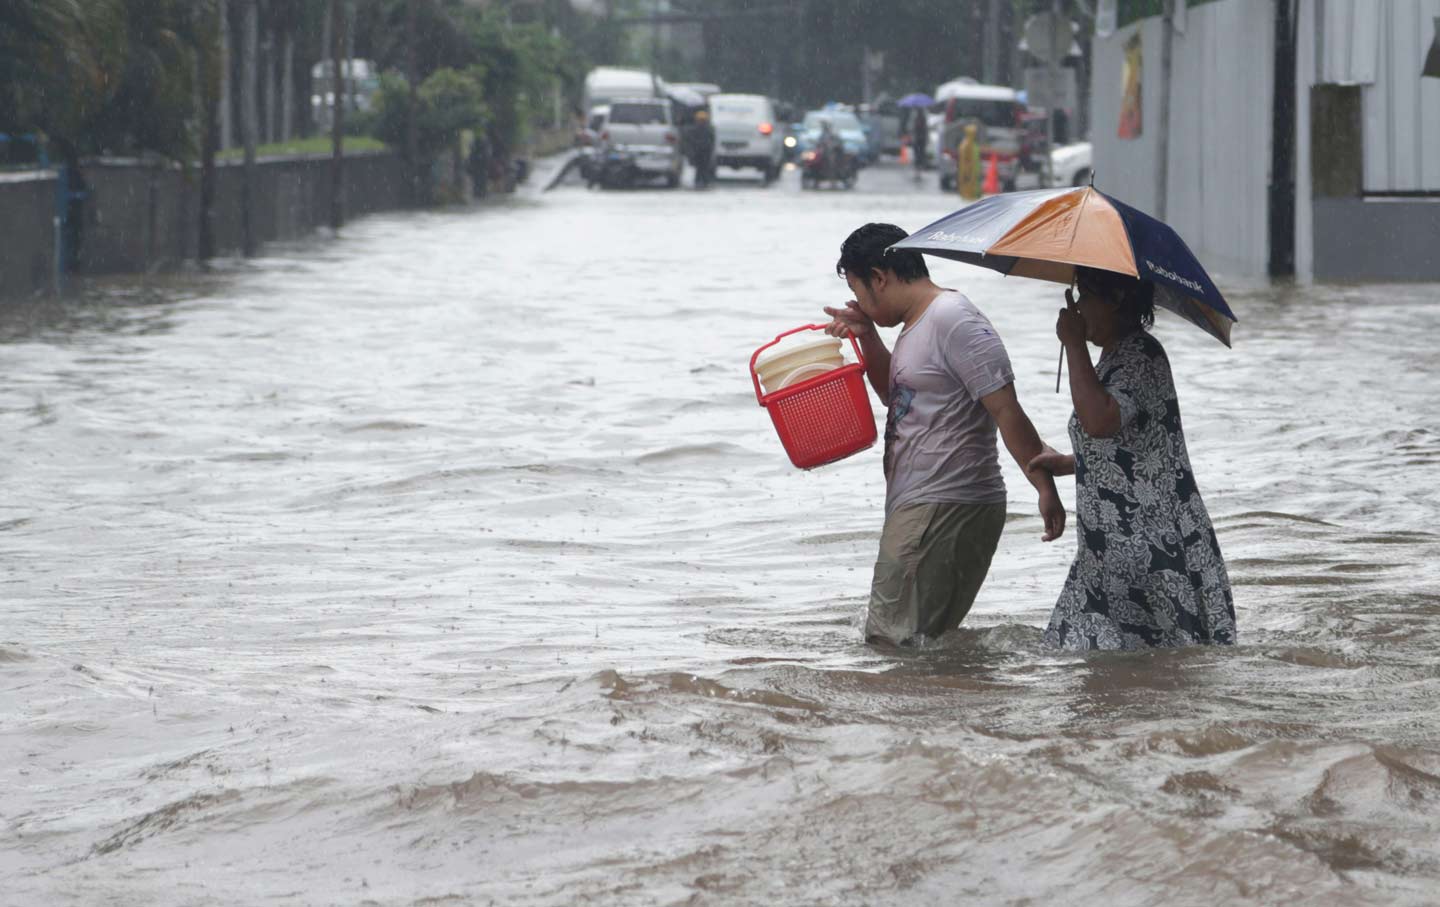 A couple wades through floodwaters in Jakarta, Indonesia.